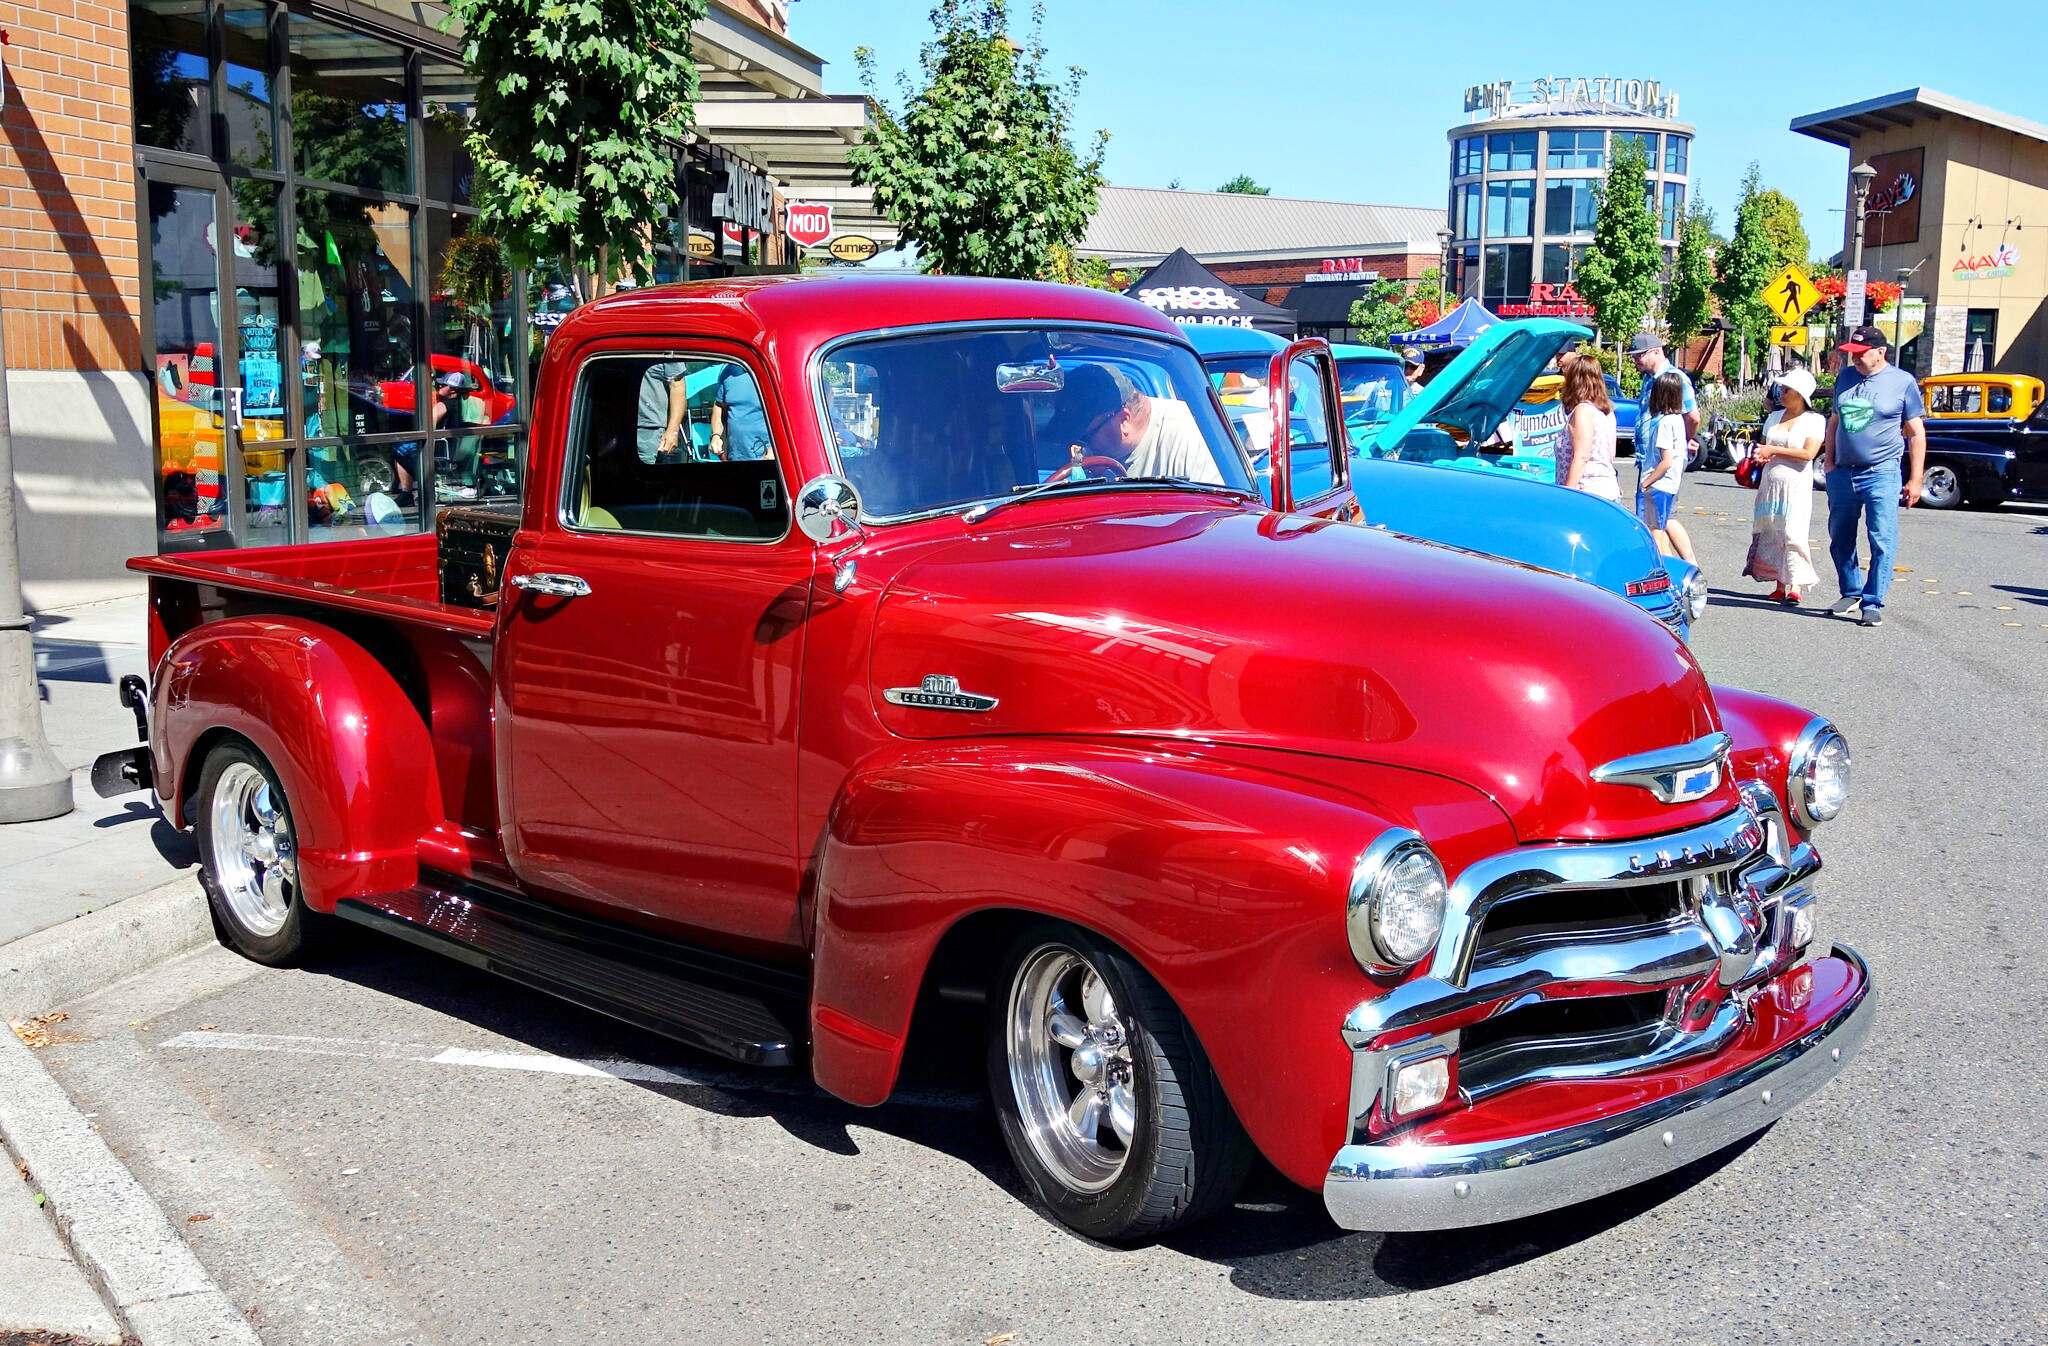 Kent Station’s fifth annual Cruisin’ Kent Car Show is set for 11 a.m. to 2 p.m. Sunday, Aug. 27. This truck was on display in 2022. COURTESY FILE PHOTO, Kent Station